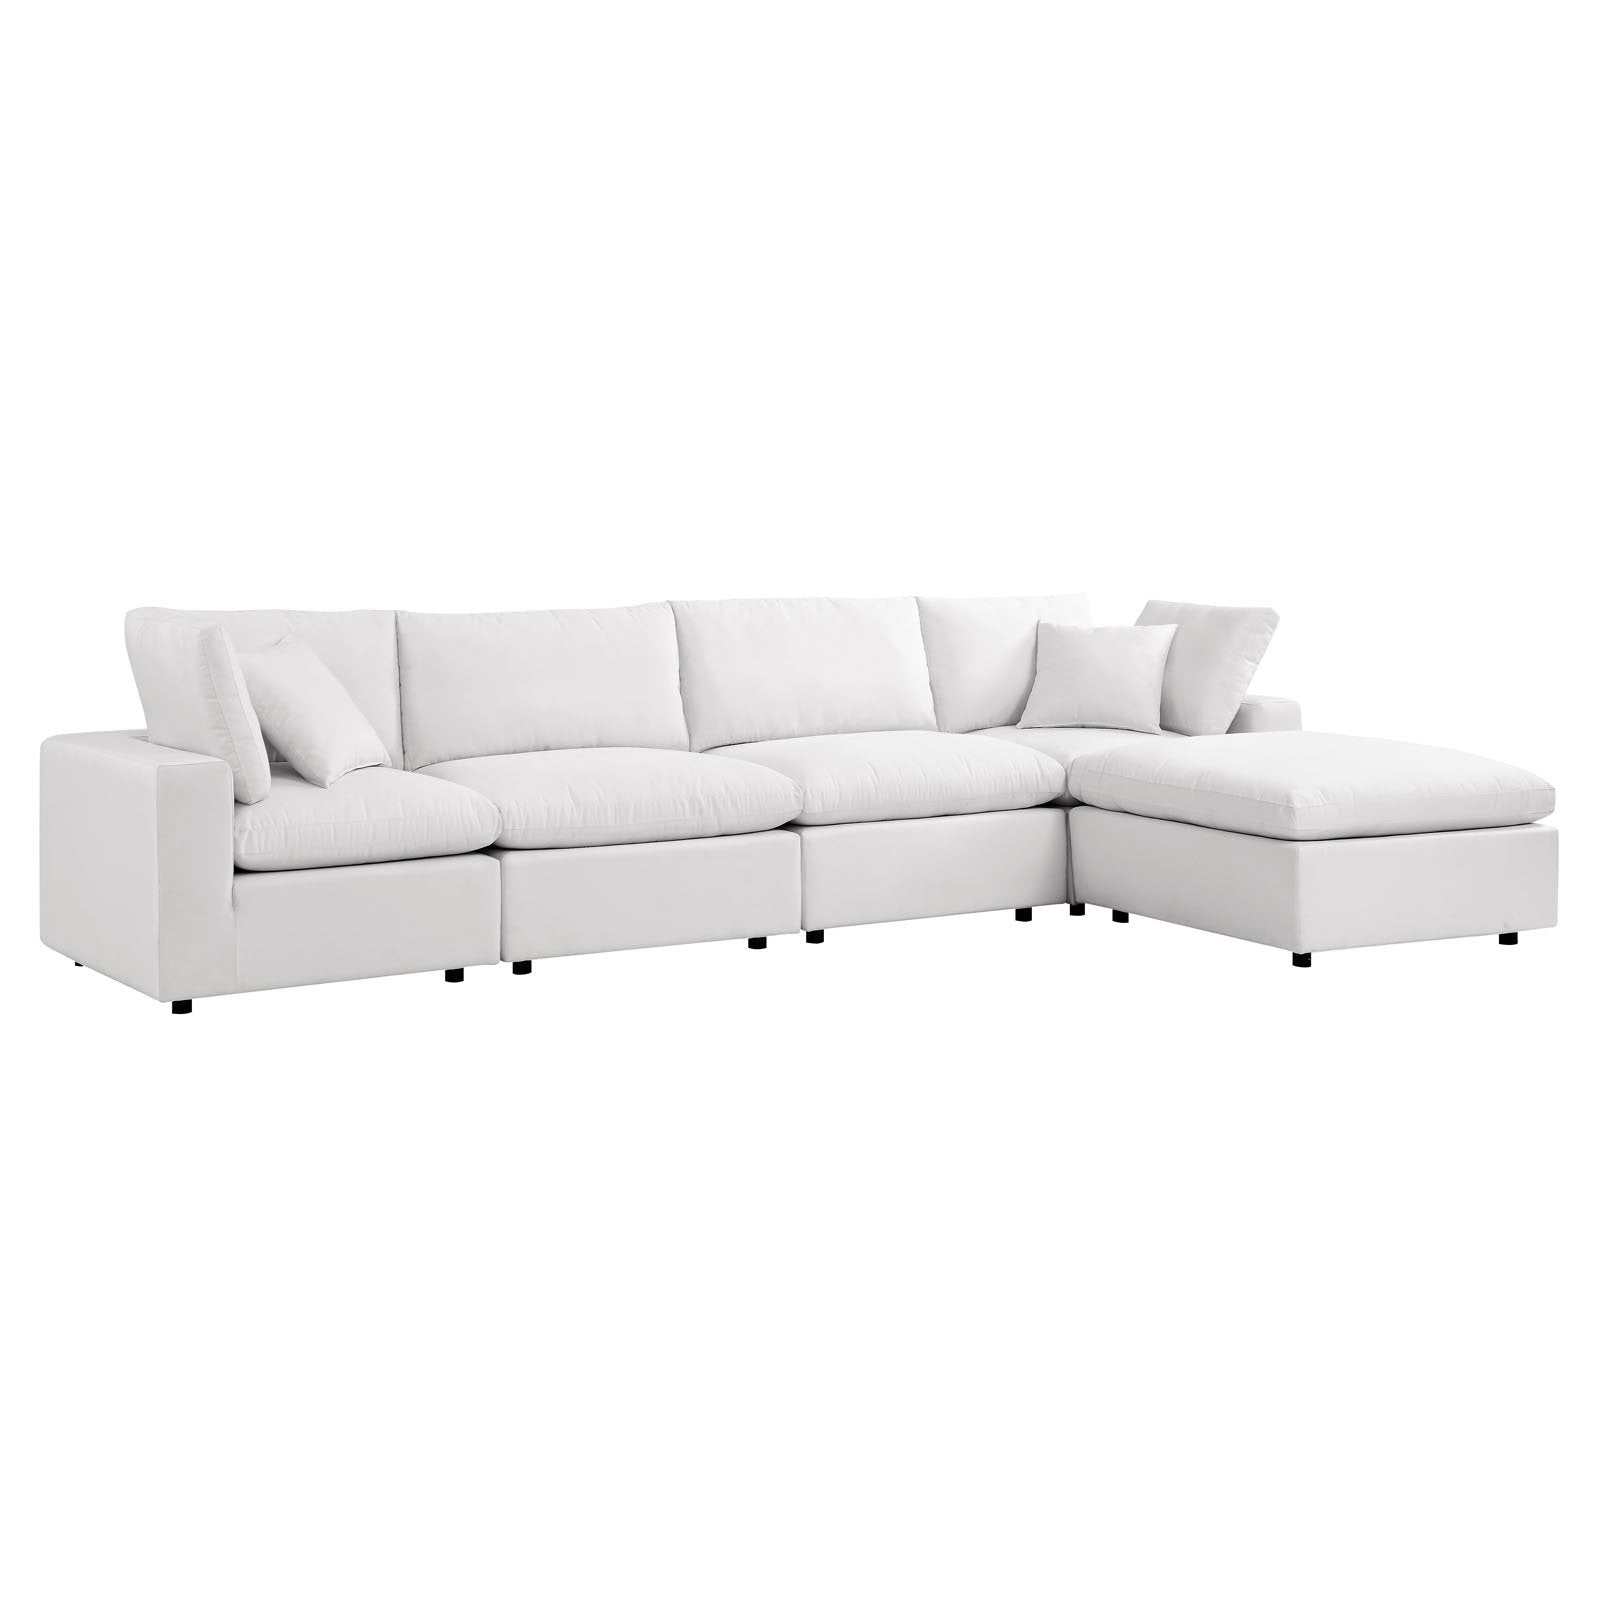 Commix 5-Piece Outdoor Patio Sectional Sofa